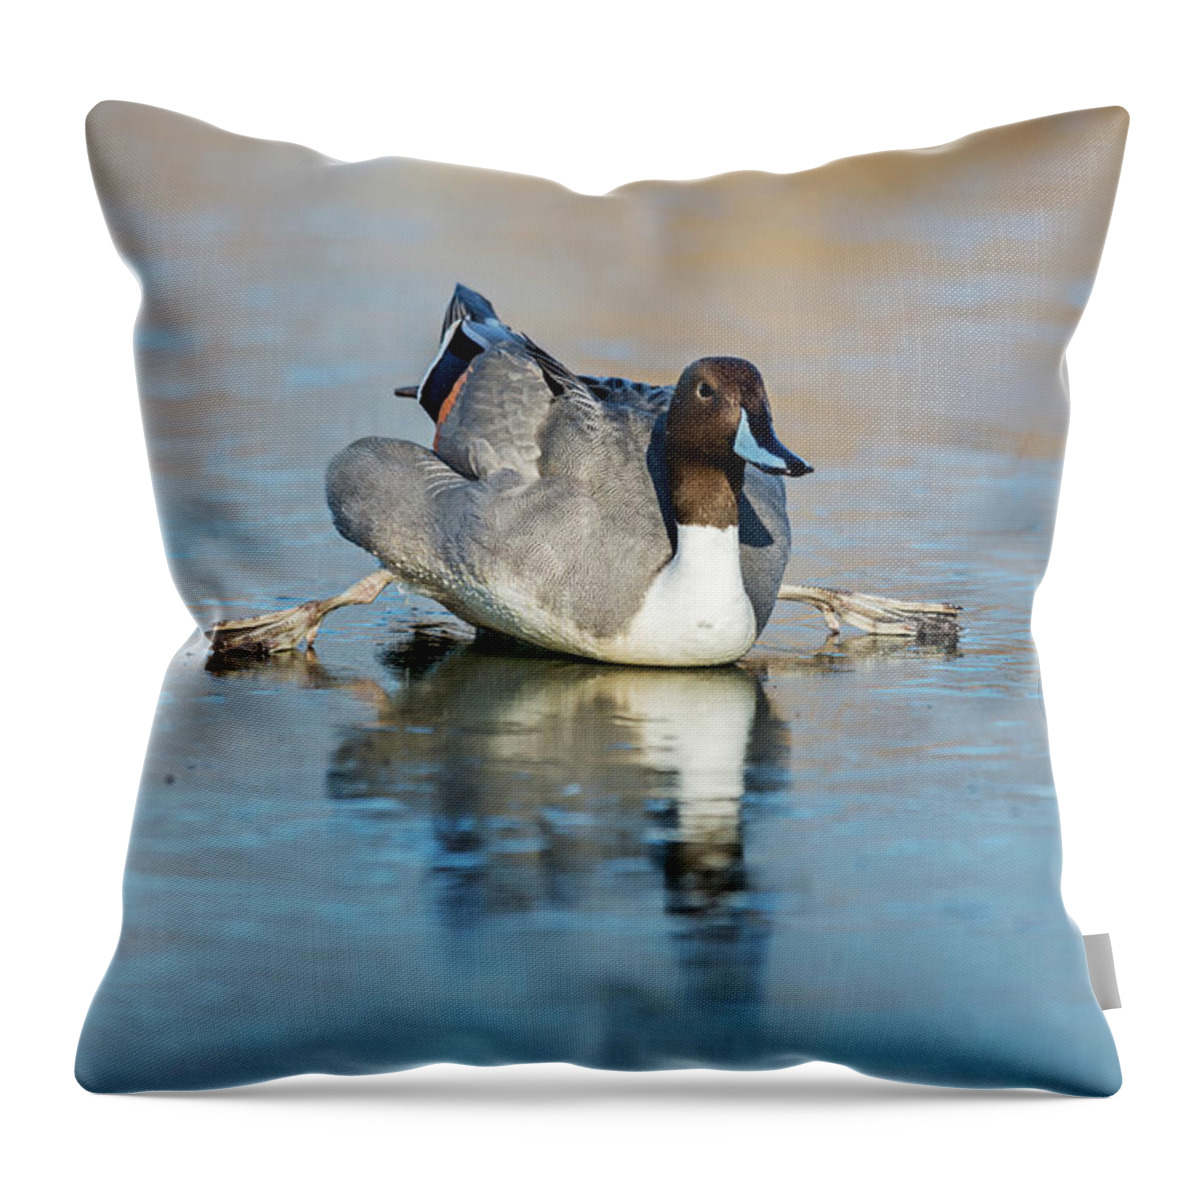 Pintail Throw Pillow featuring the photograph Pintail Spitz by Terry Dadswell